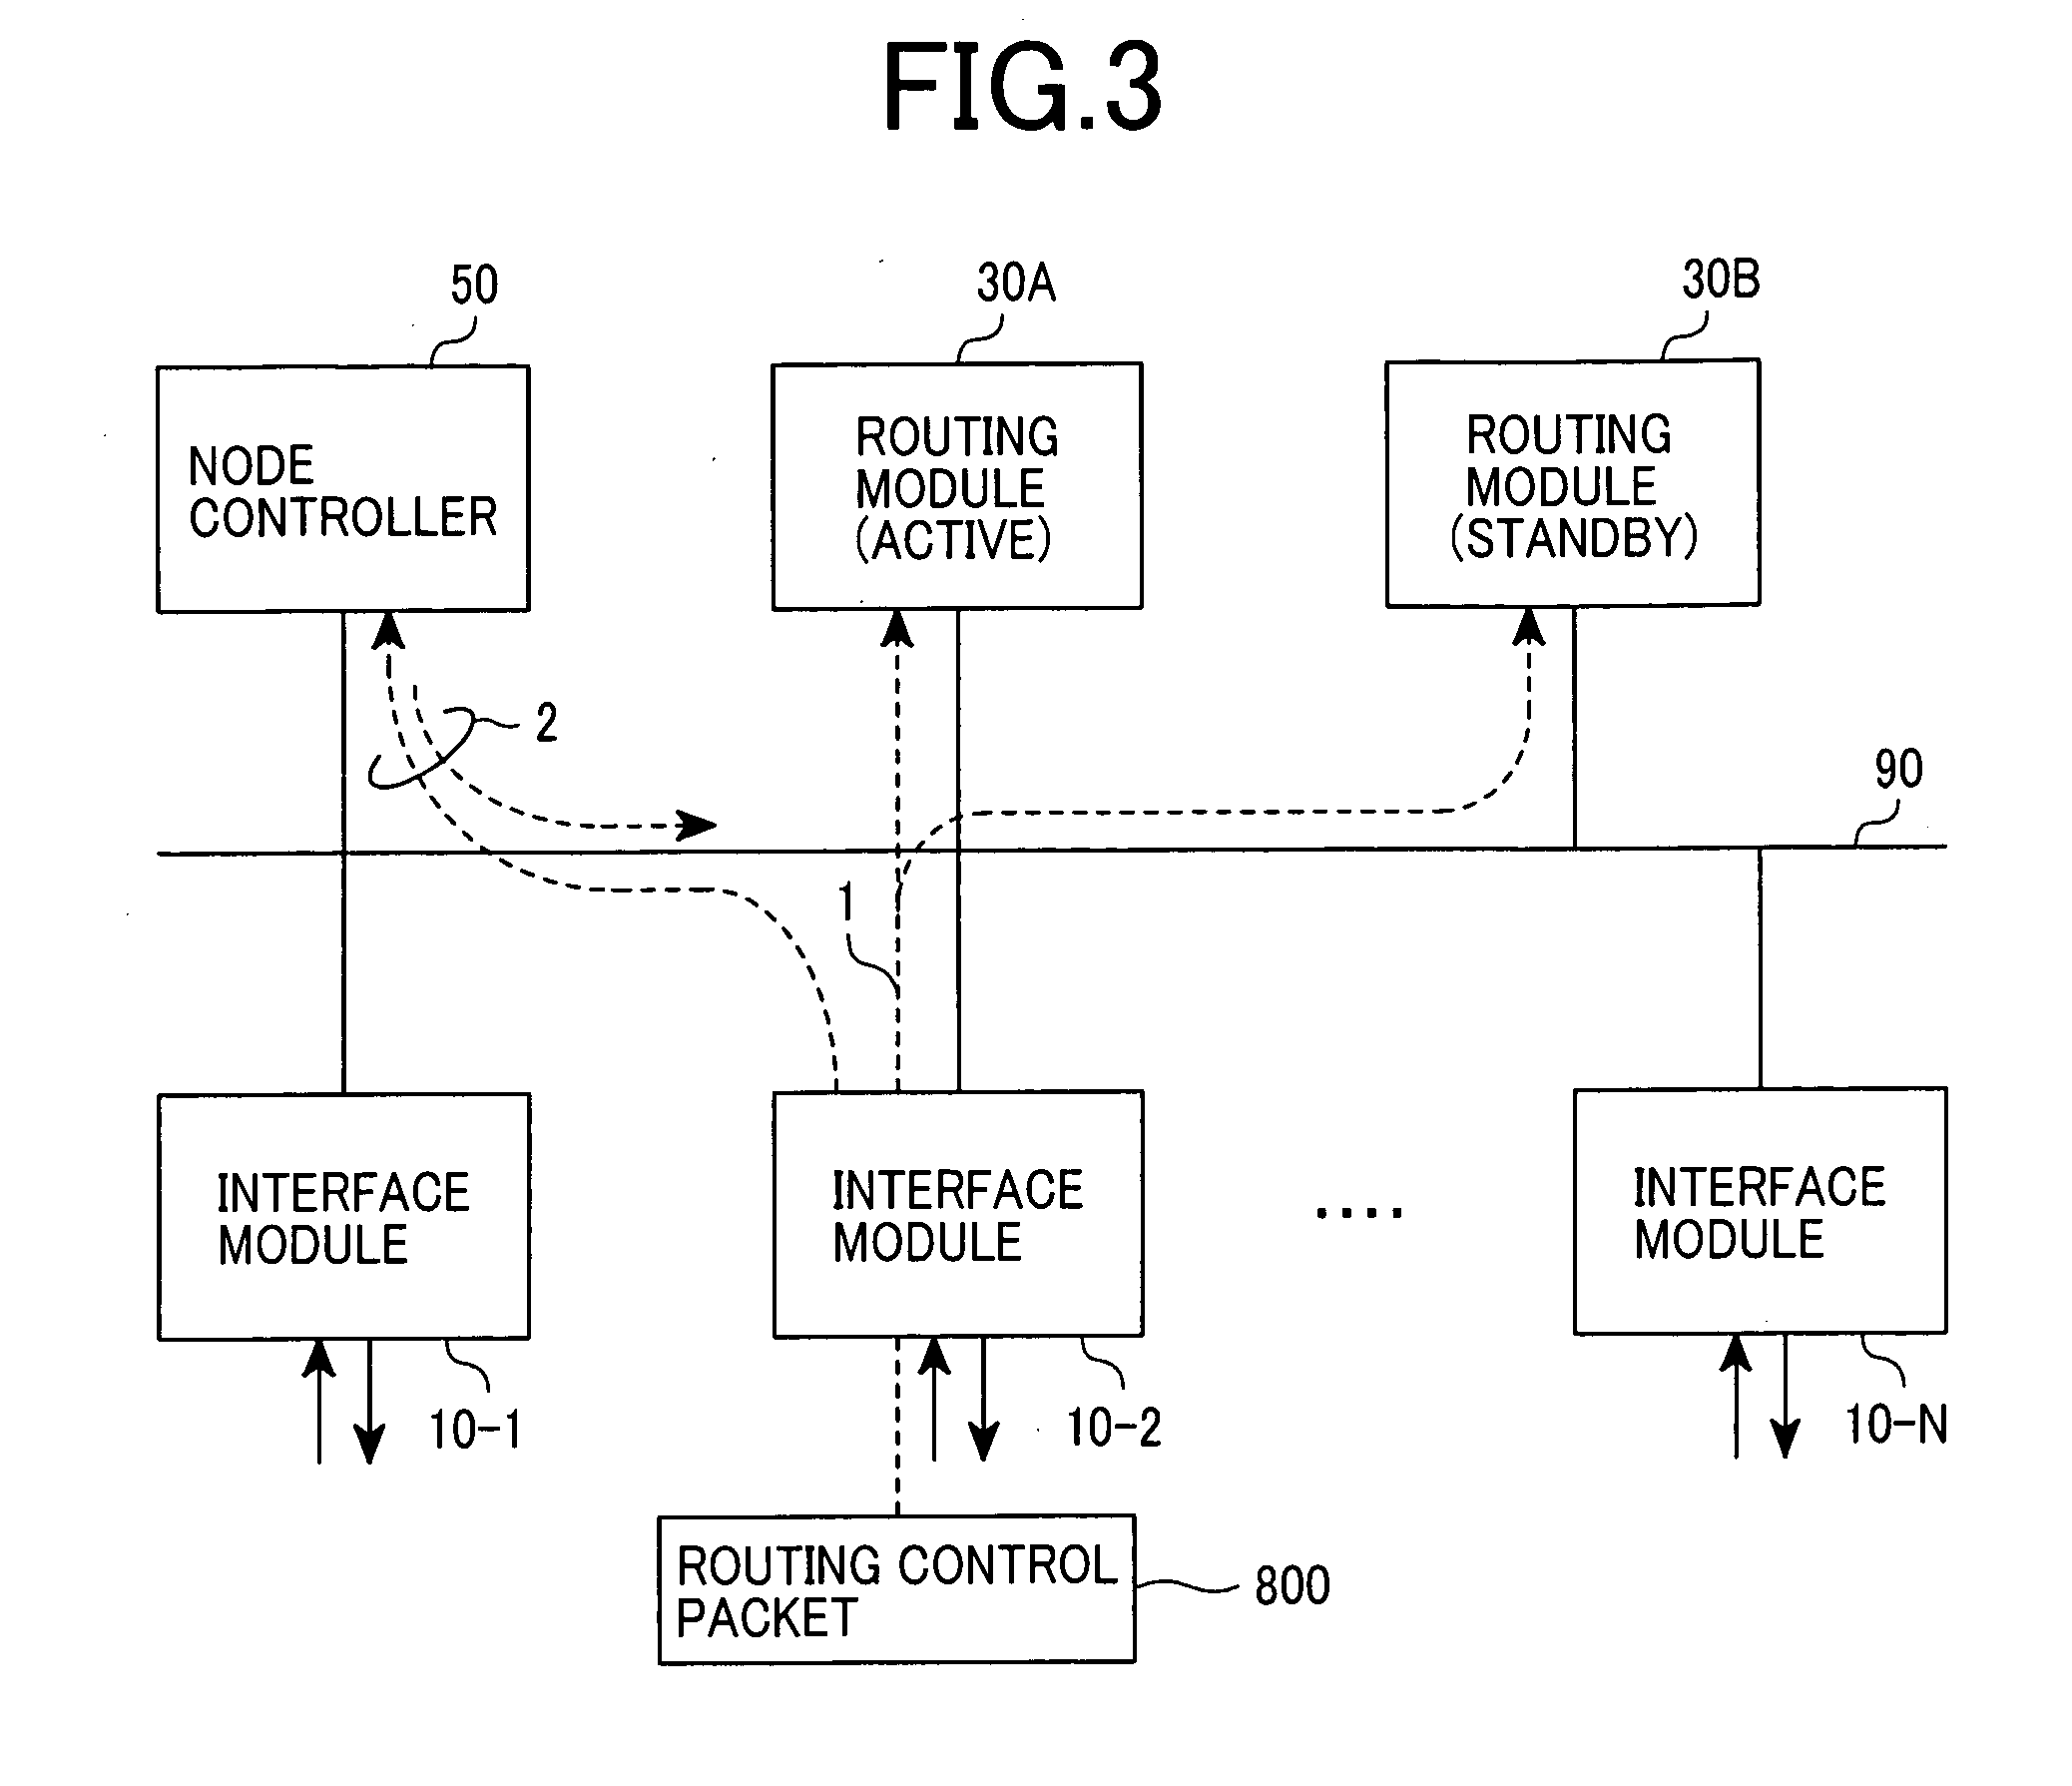 Packet forwarding apparatus with redundant routing module